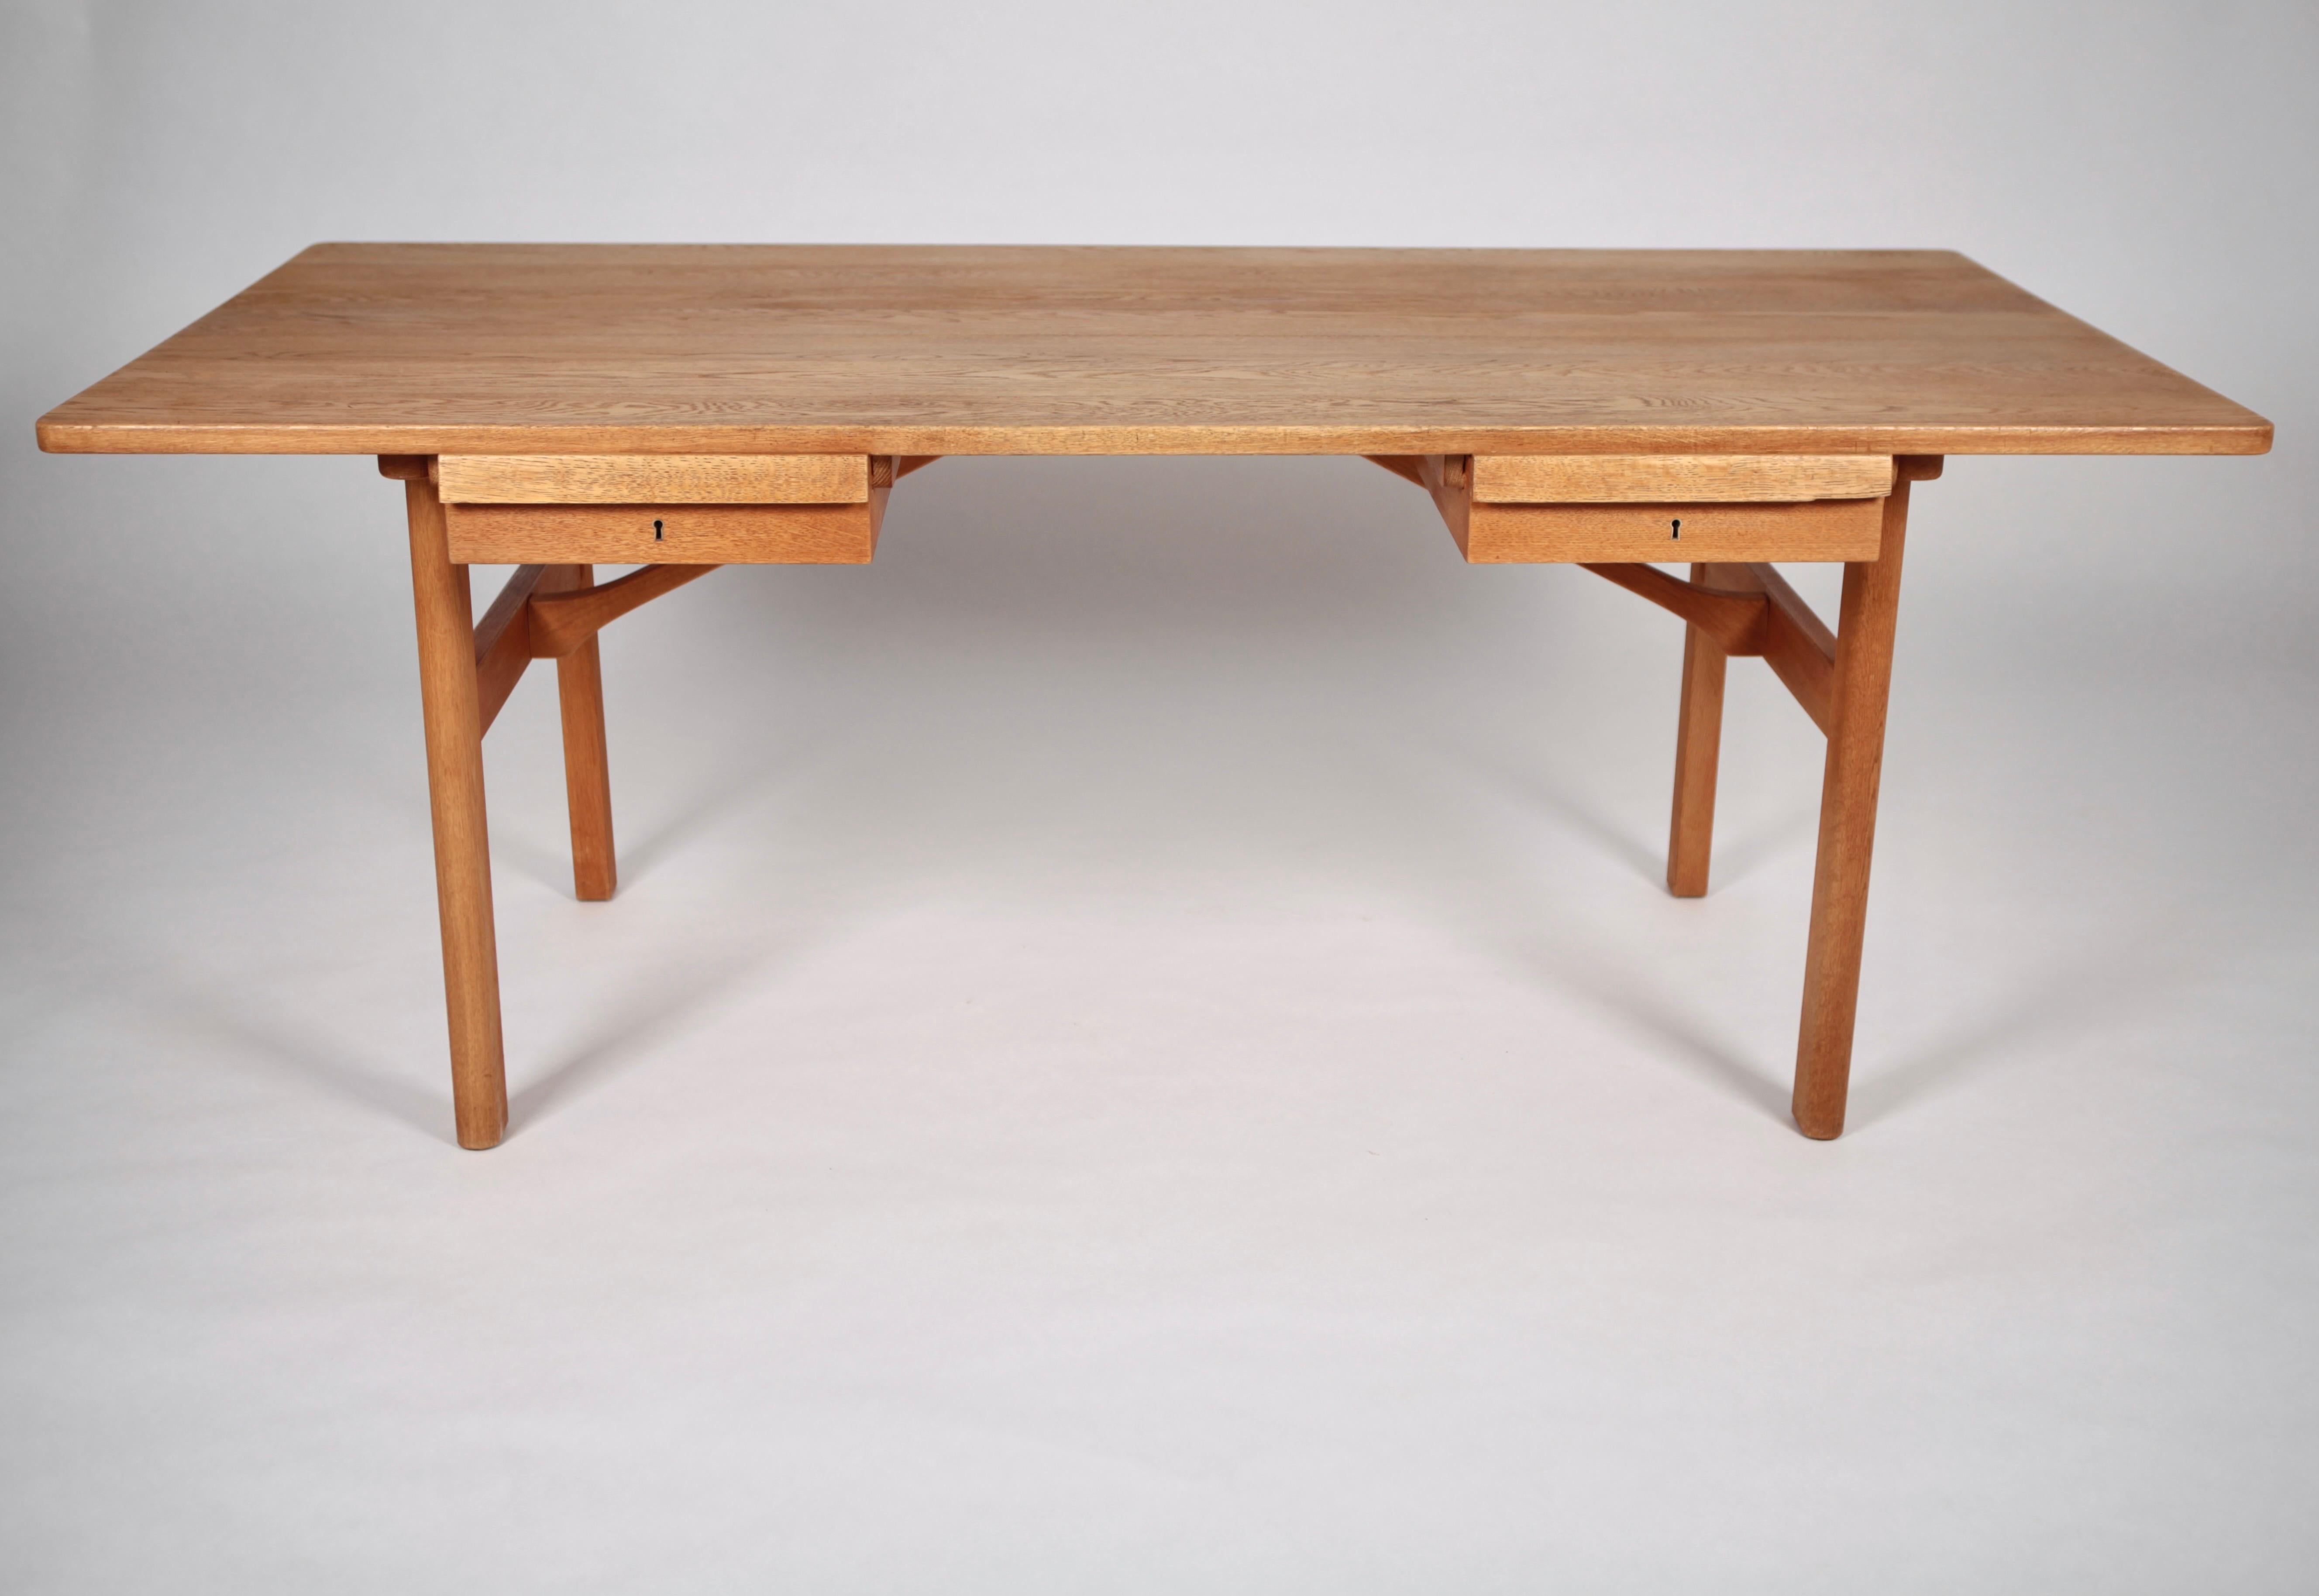 Børge Mogensen, rare desk in solid oak, executed by Frederica Stolefabrik in Denmark, 1950s.
It has been refinished, preserving the patina.